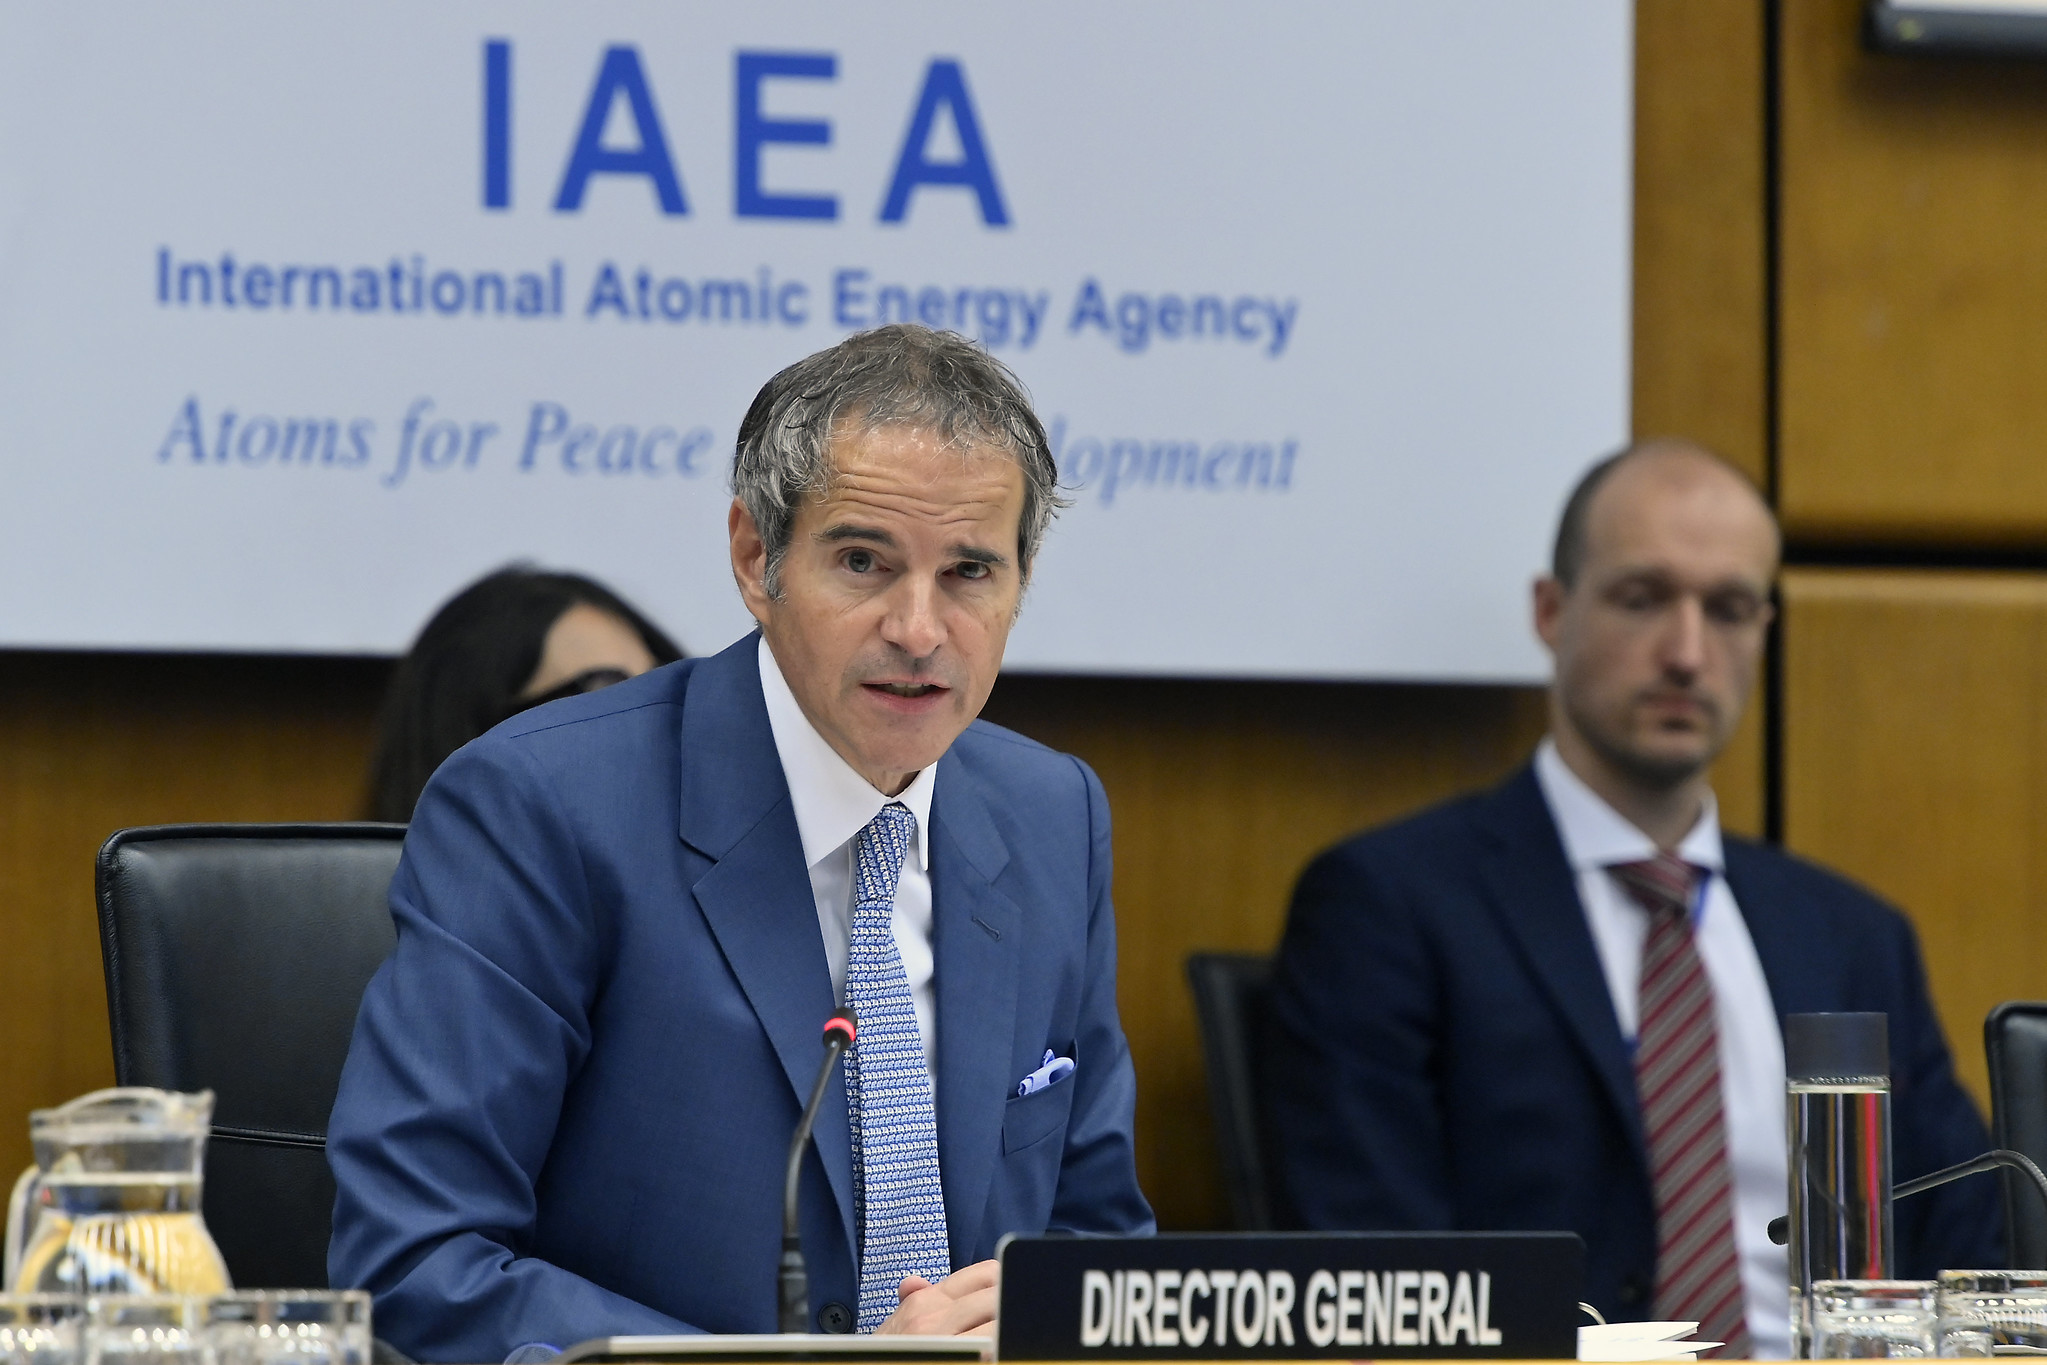 DG Grossi Opens Board Meeting with Updates on Ukraine, Iran, Naval Nuclear Propulsion and IAEA’s Impact